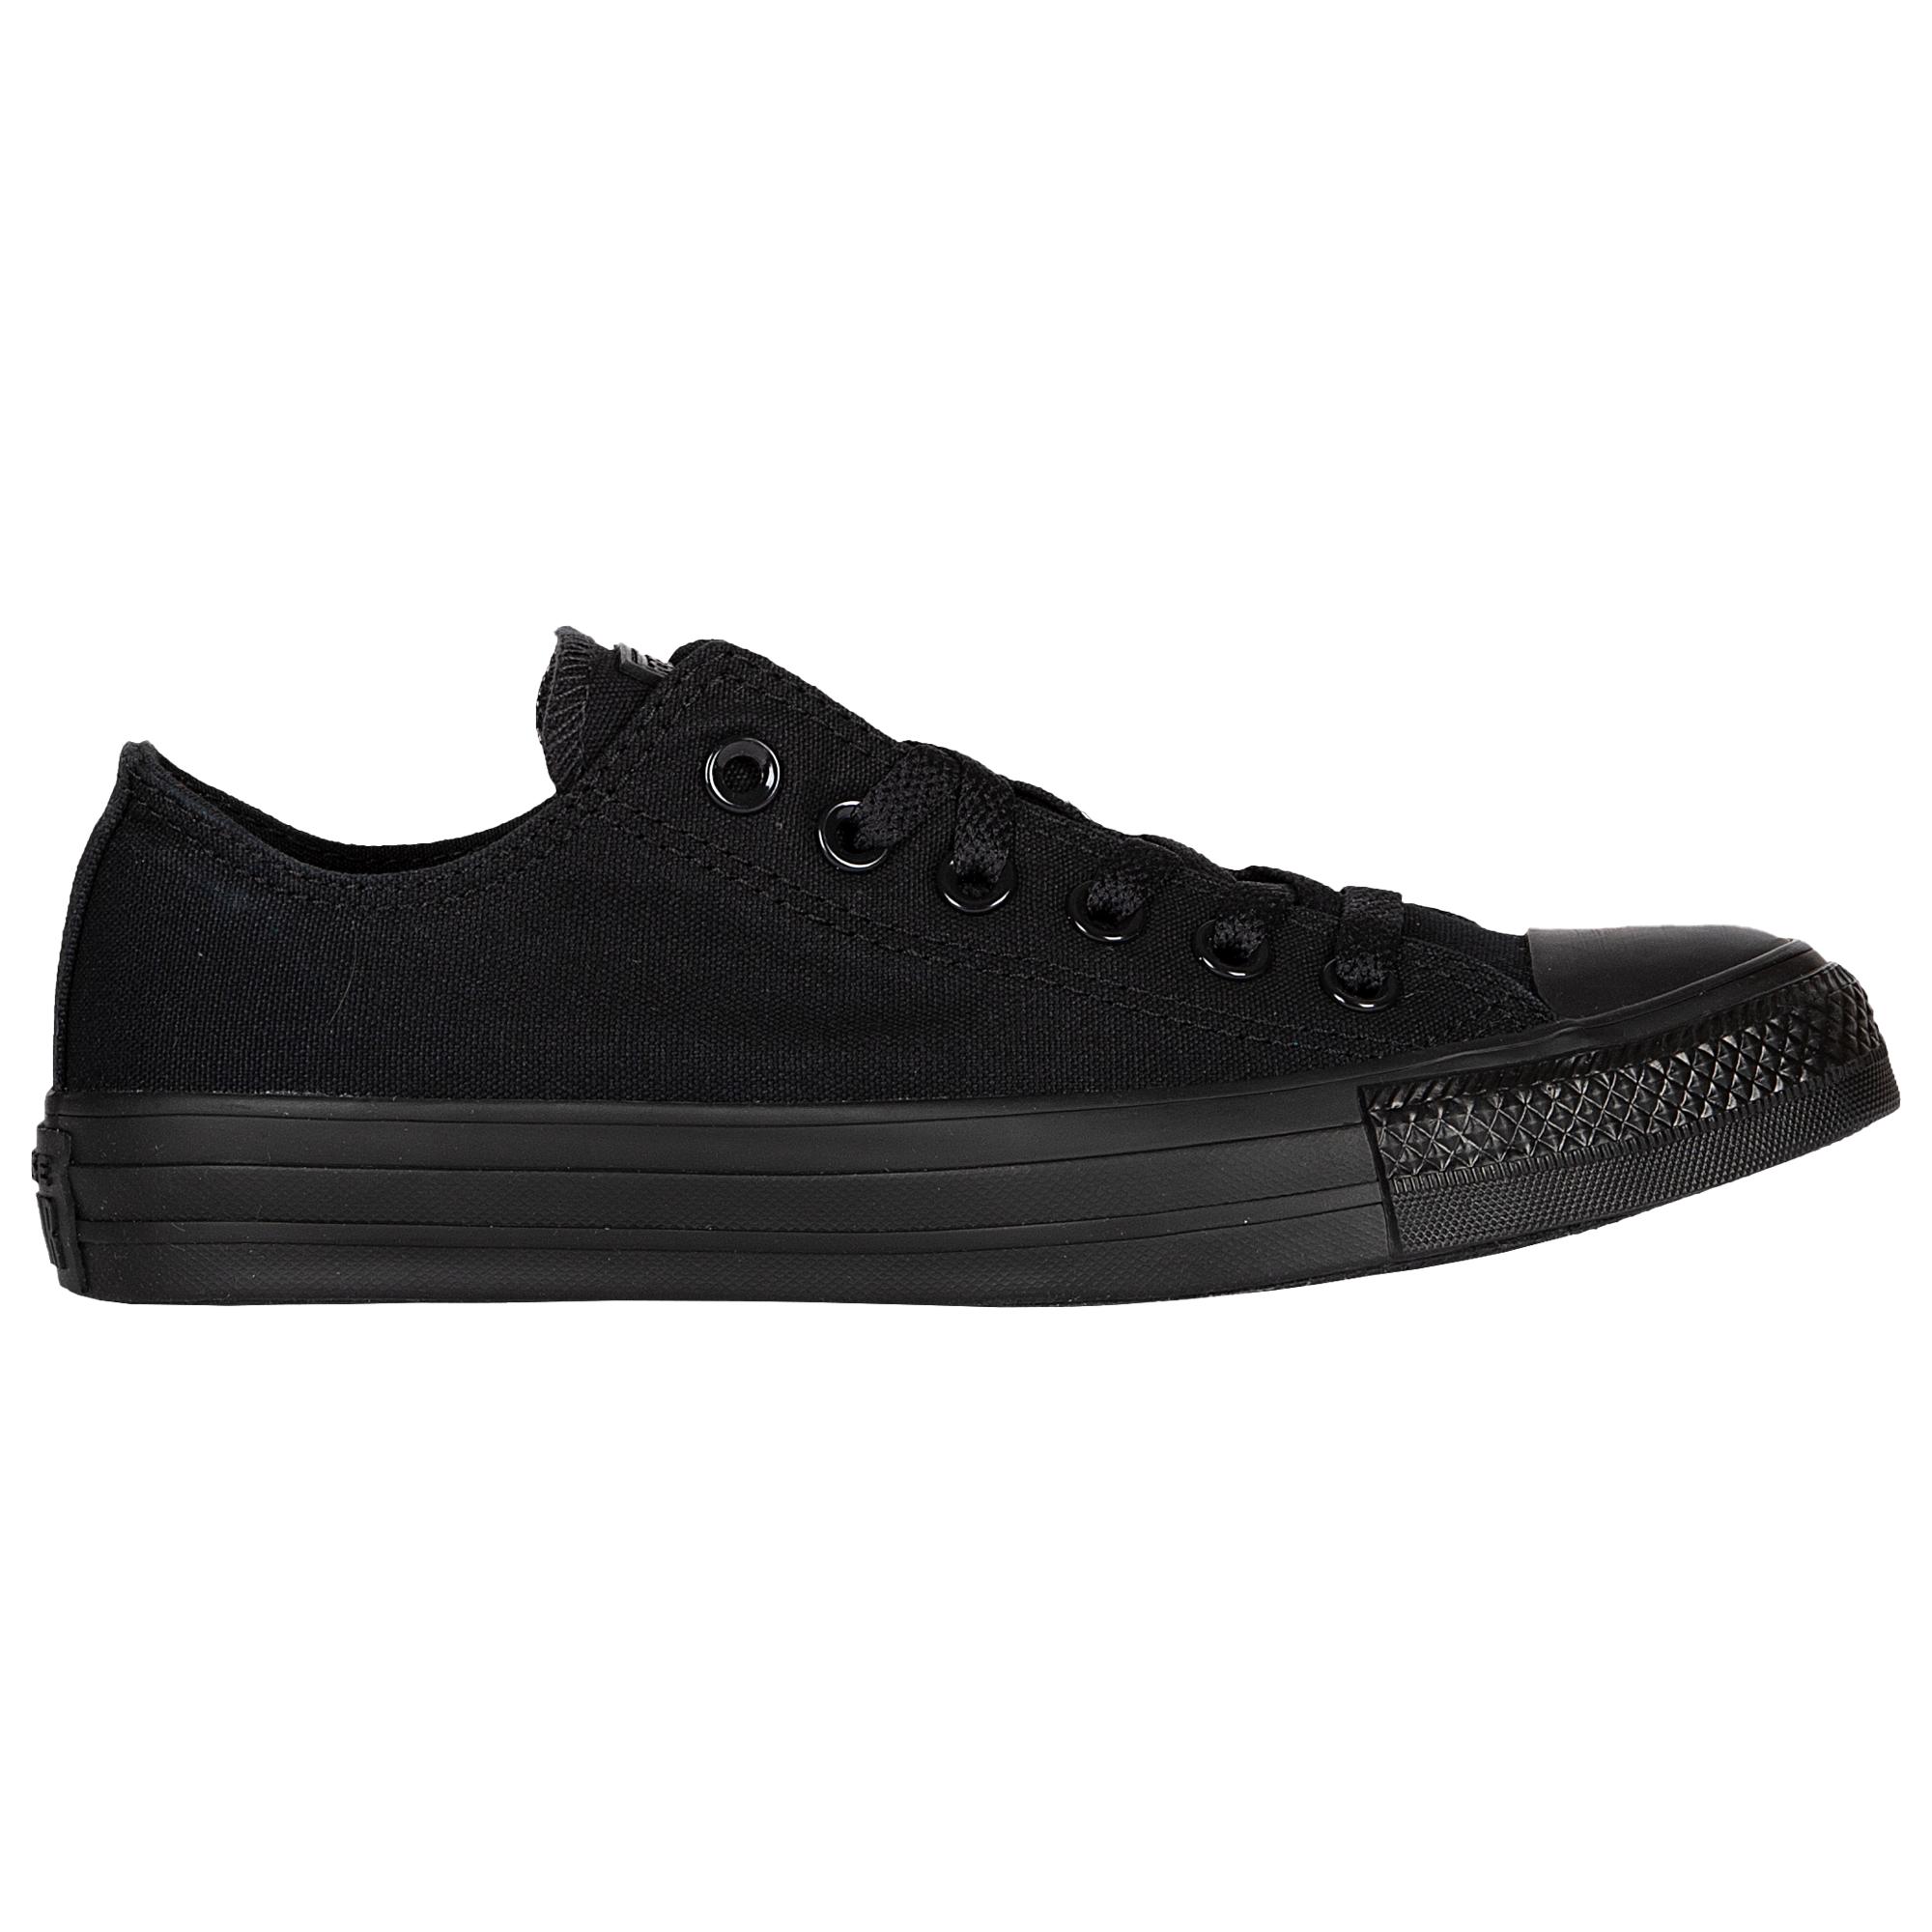 Converse Canvas All Star Ox Casual Basketball Shoes in Black/Black ...